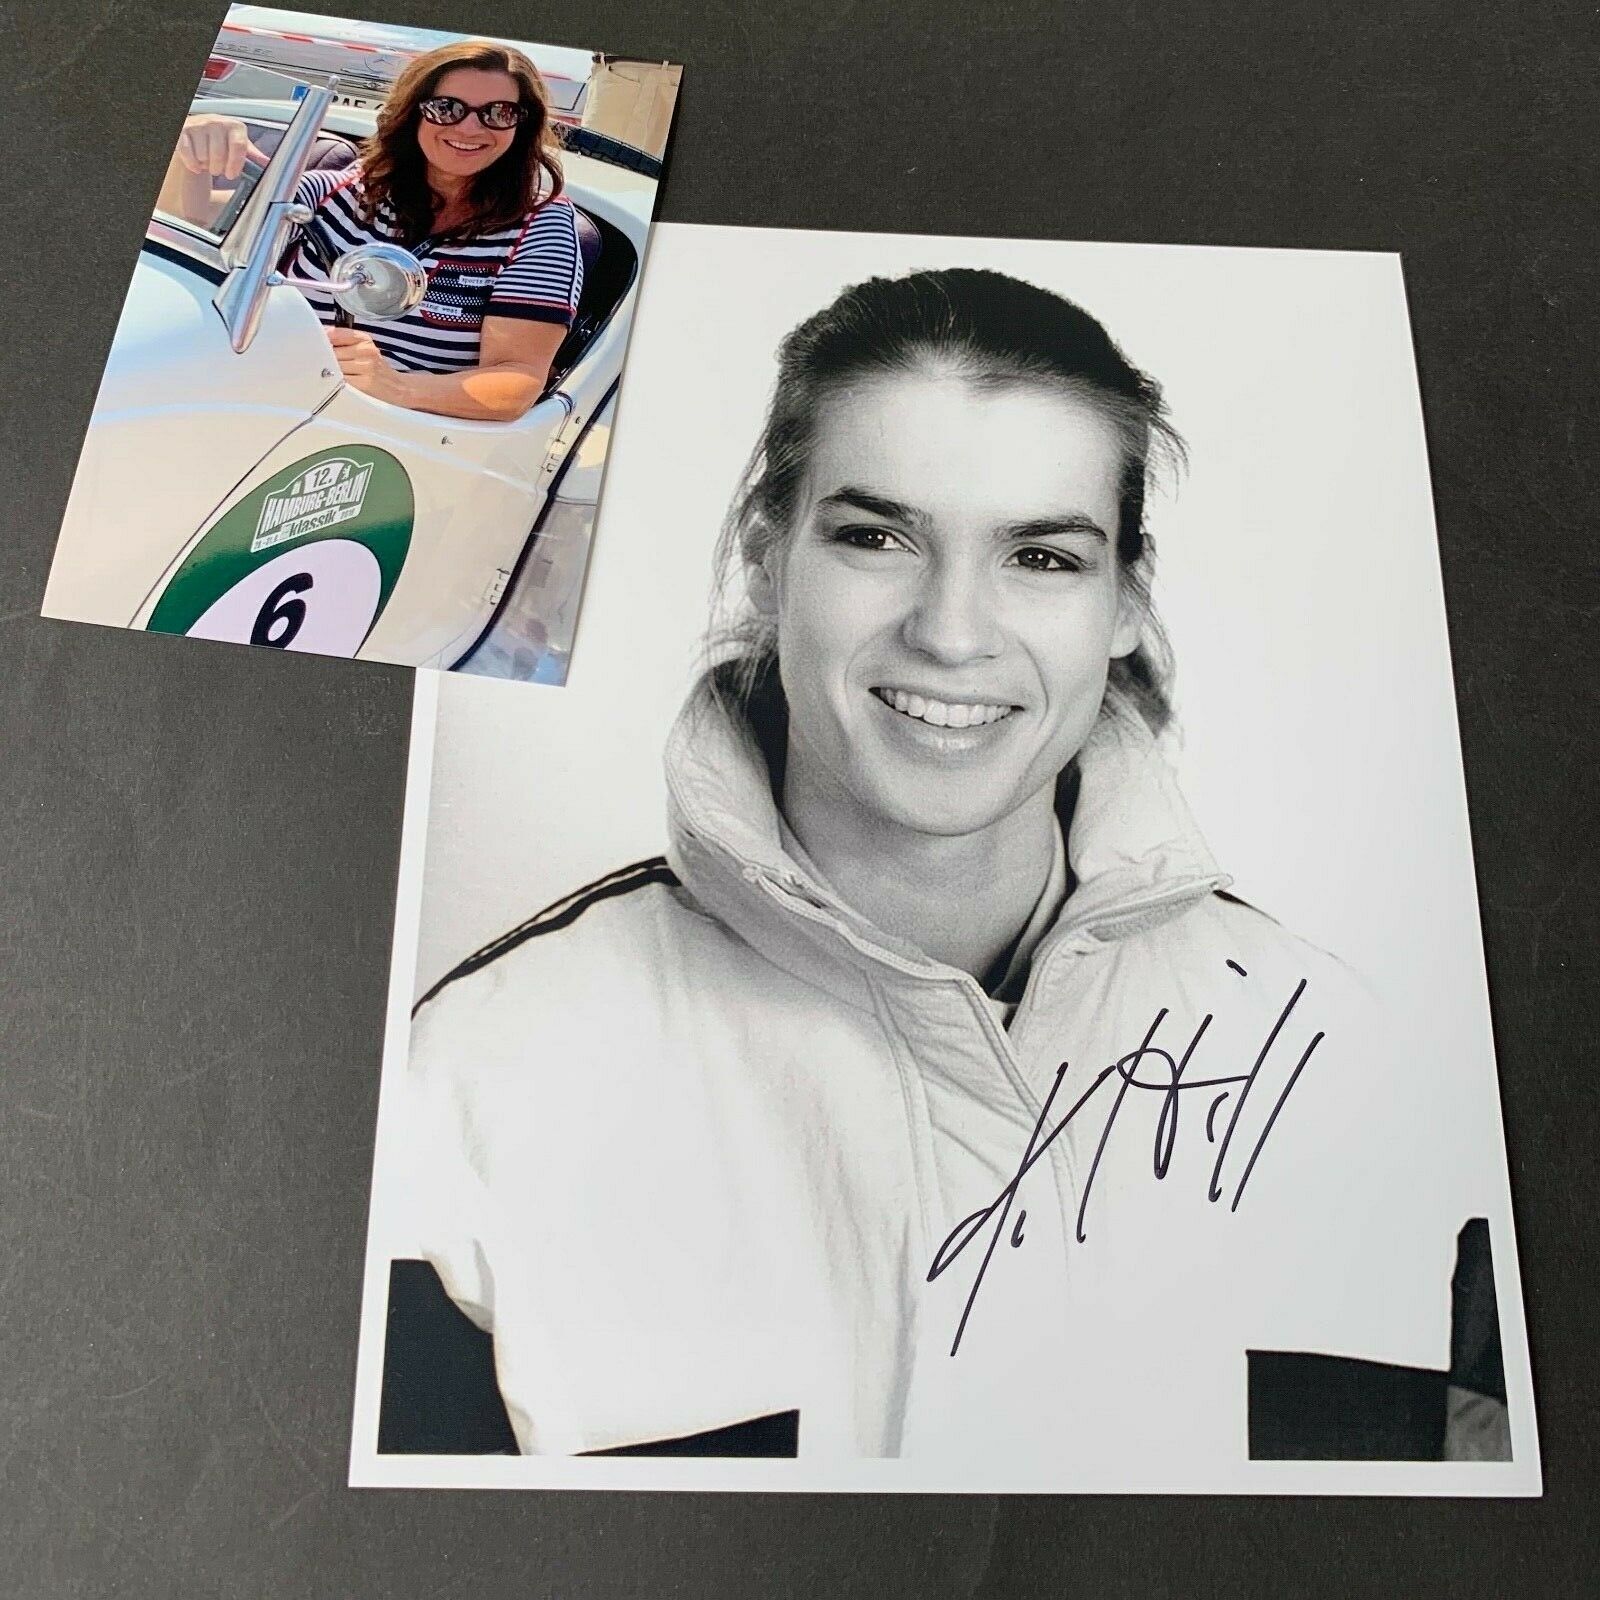 Katharina Witt 2 Olympic Gold Medals 1984/88 Figure Skating Signed Photo 8x10